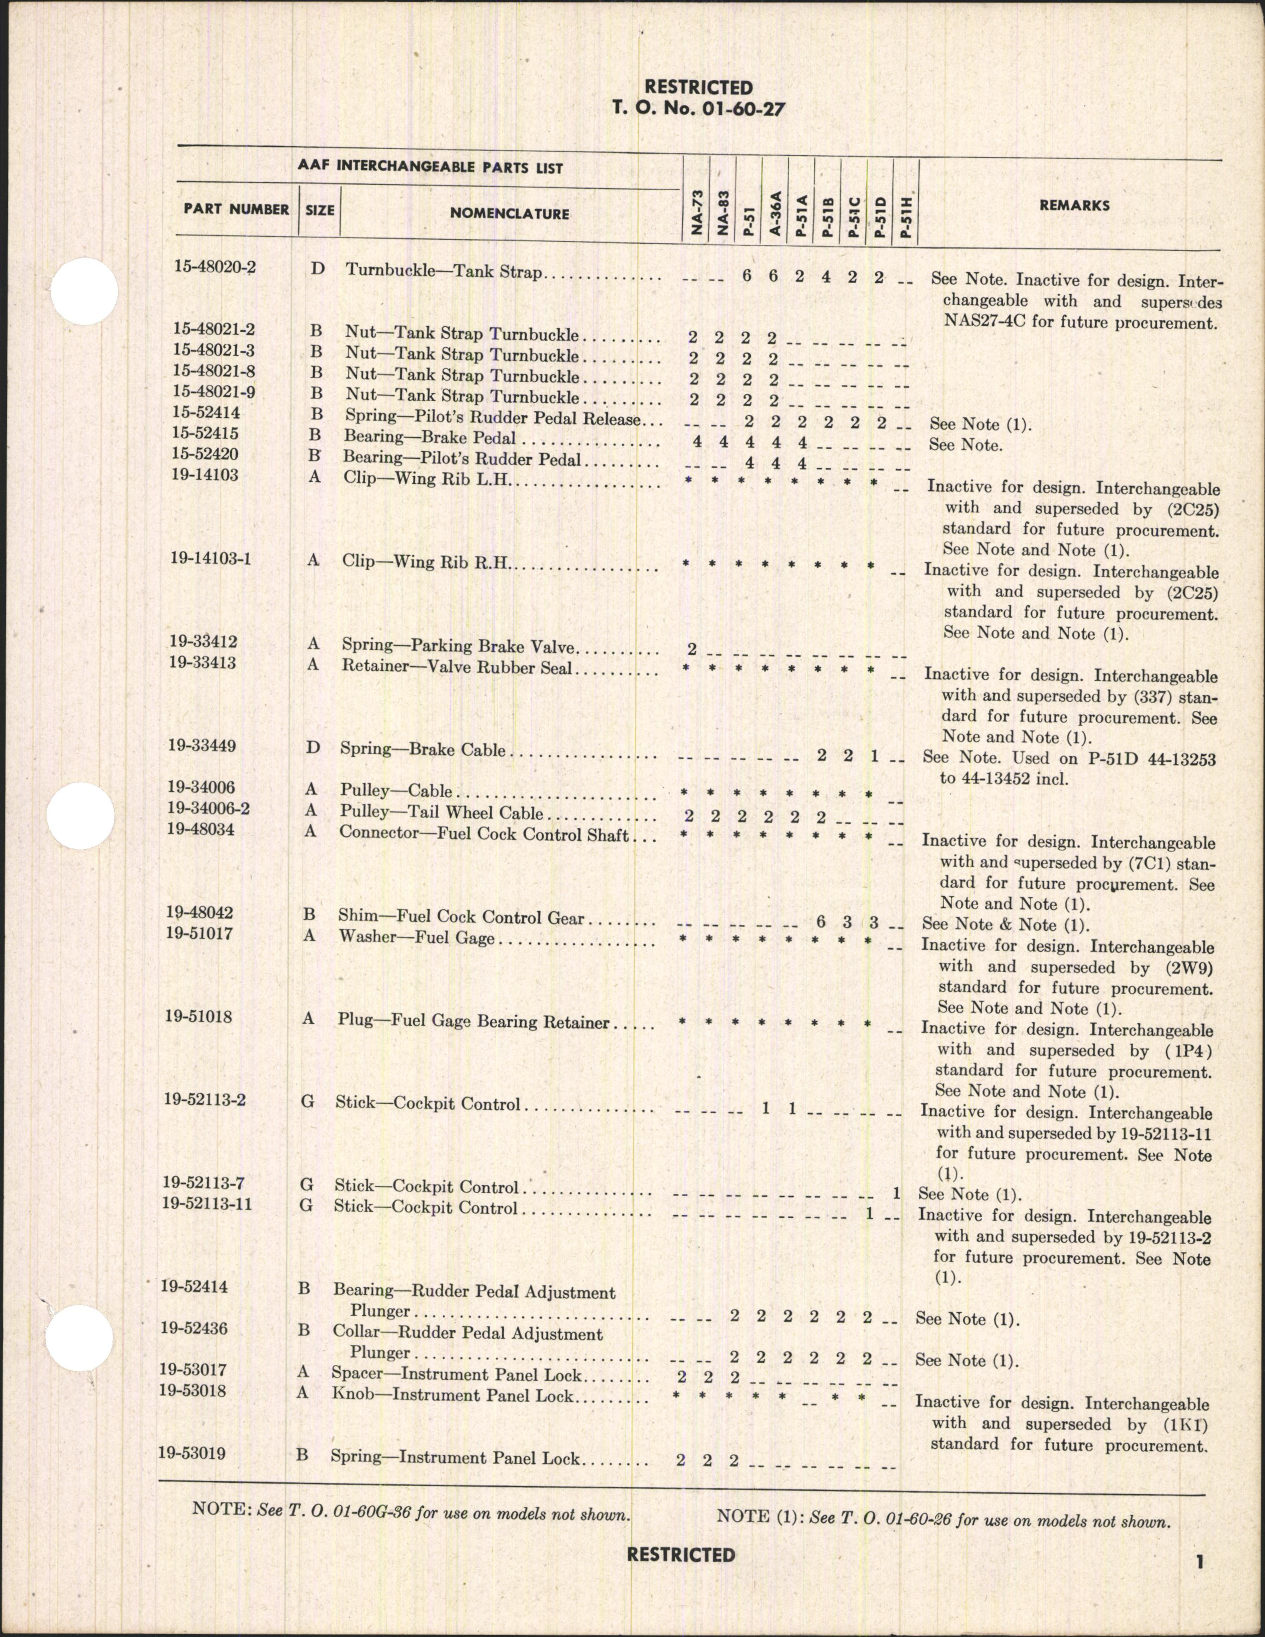 Sample page 5 from AirCorps Library document: Interchangeable Parts List for A-36A, P-51 Series, and Mustang I, IA, II, III, and IV